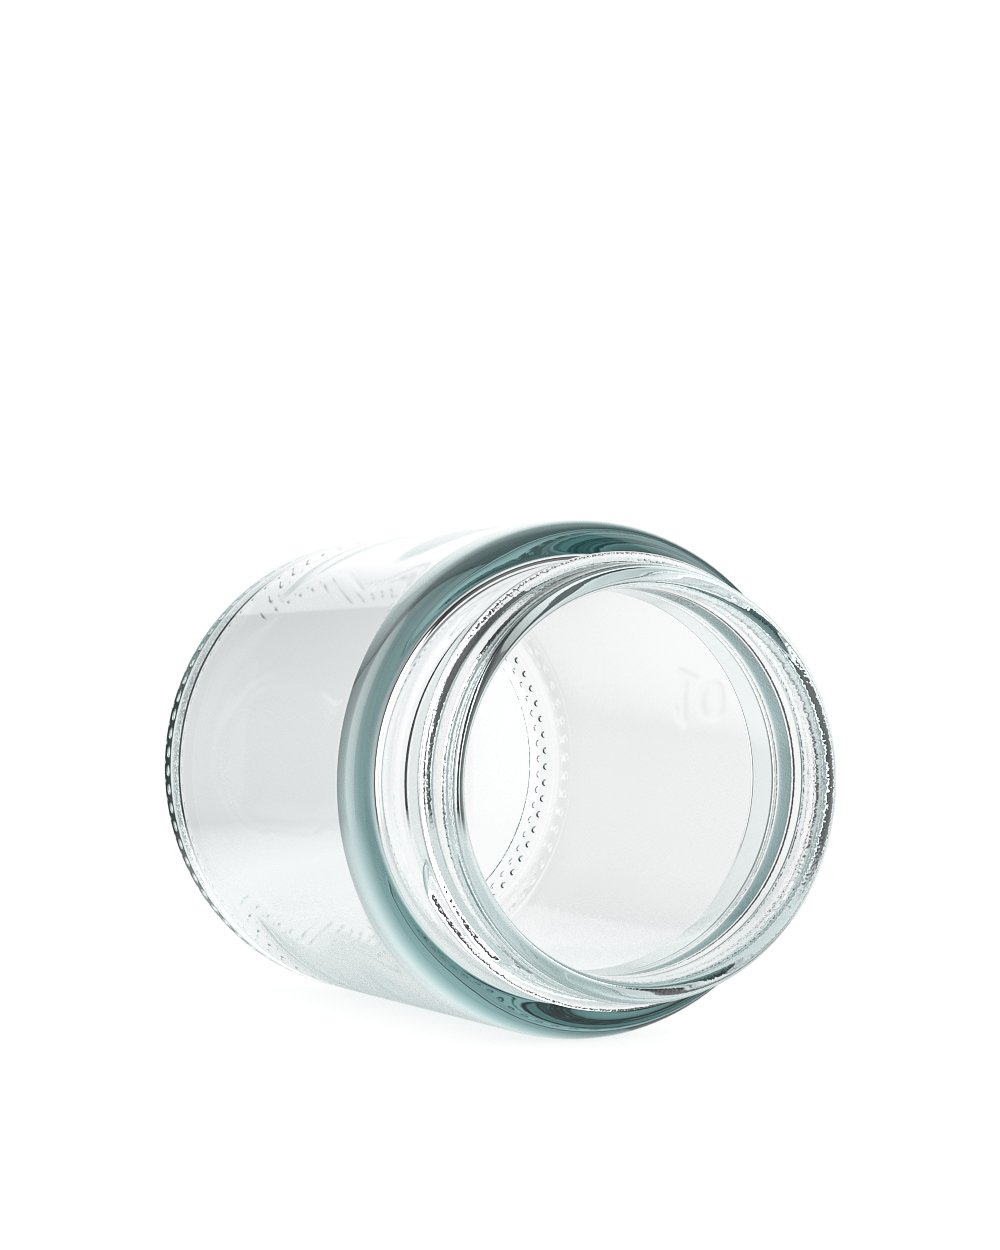 Child Resistant | Straight Sided Clear Glass Jars with Black Cap | 50mm - 4oz - 100 Count - 4